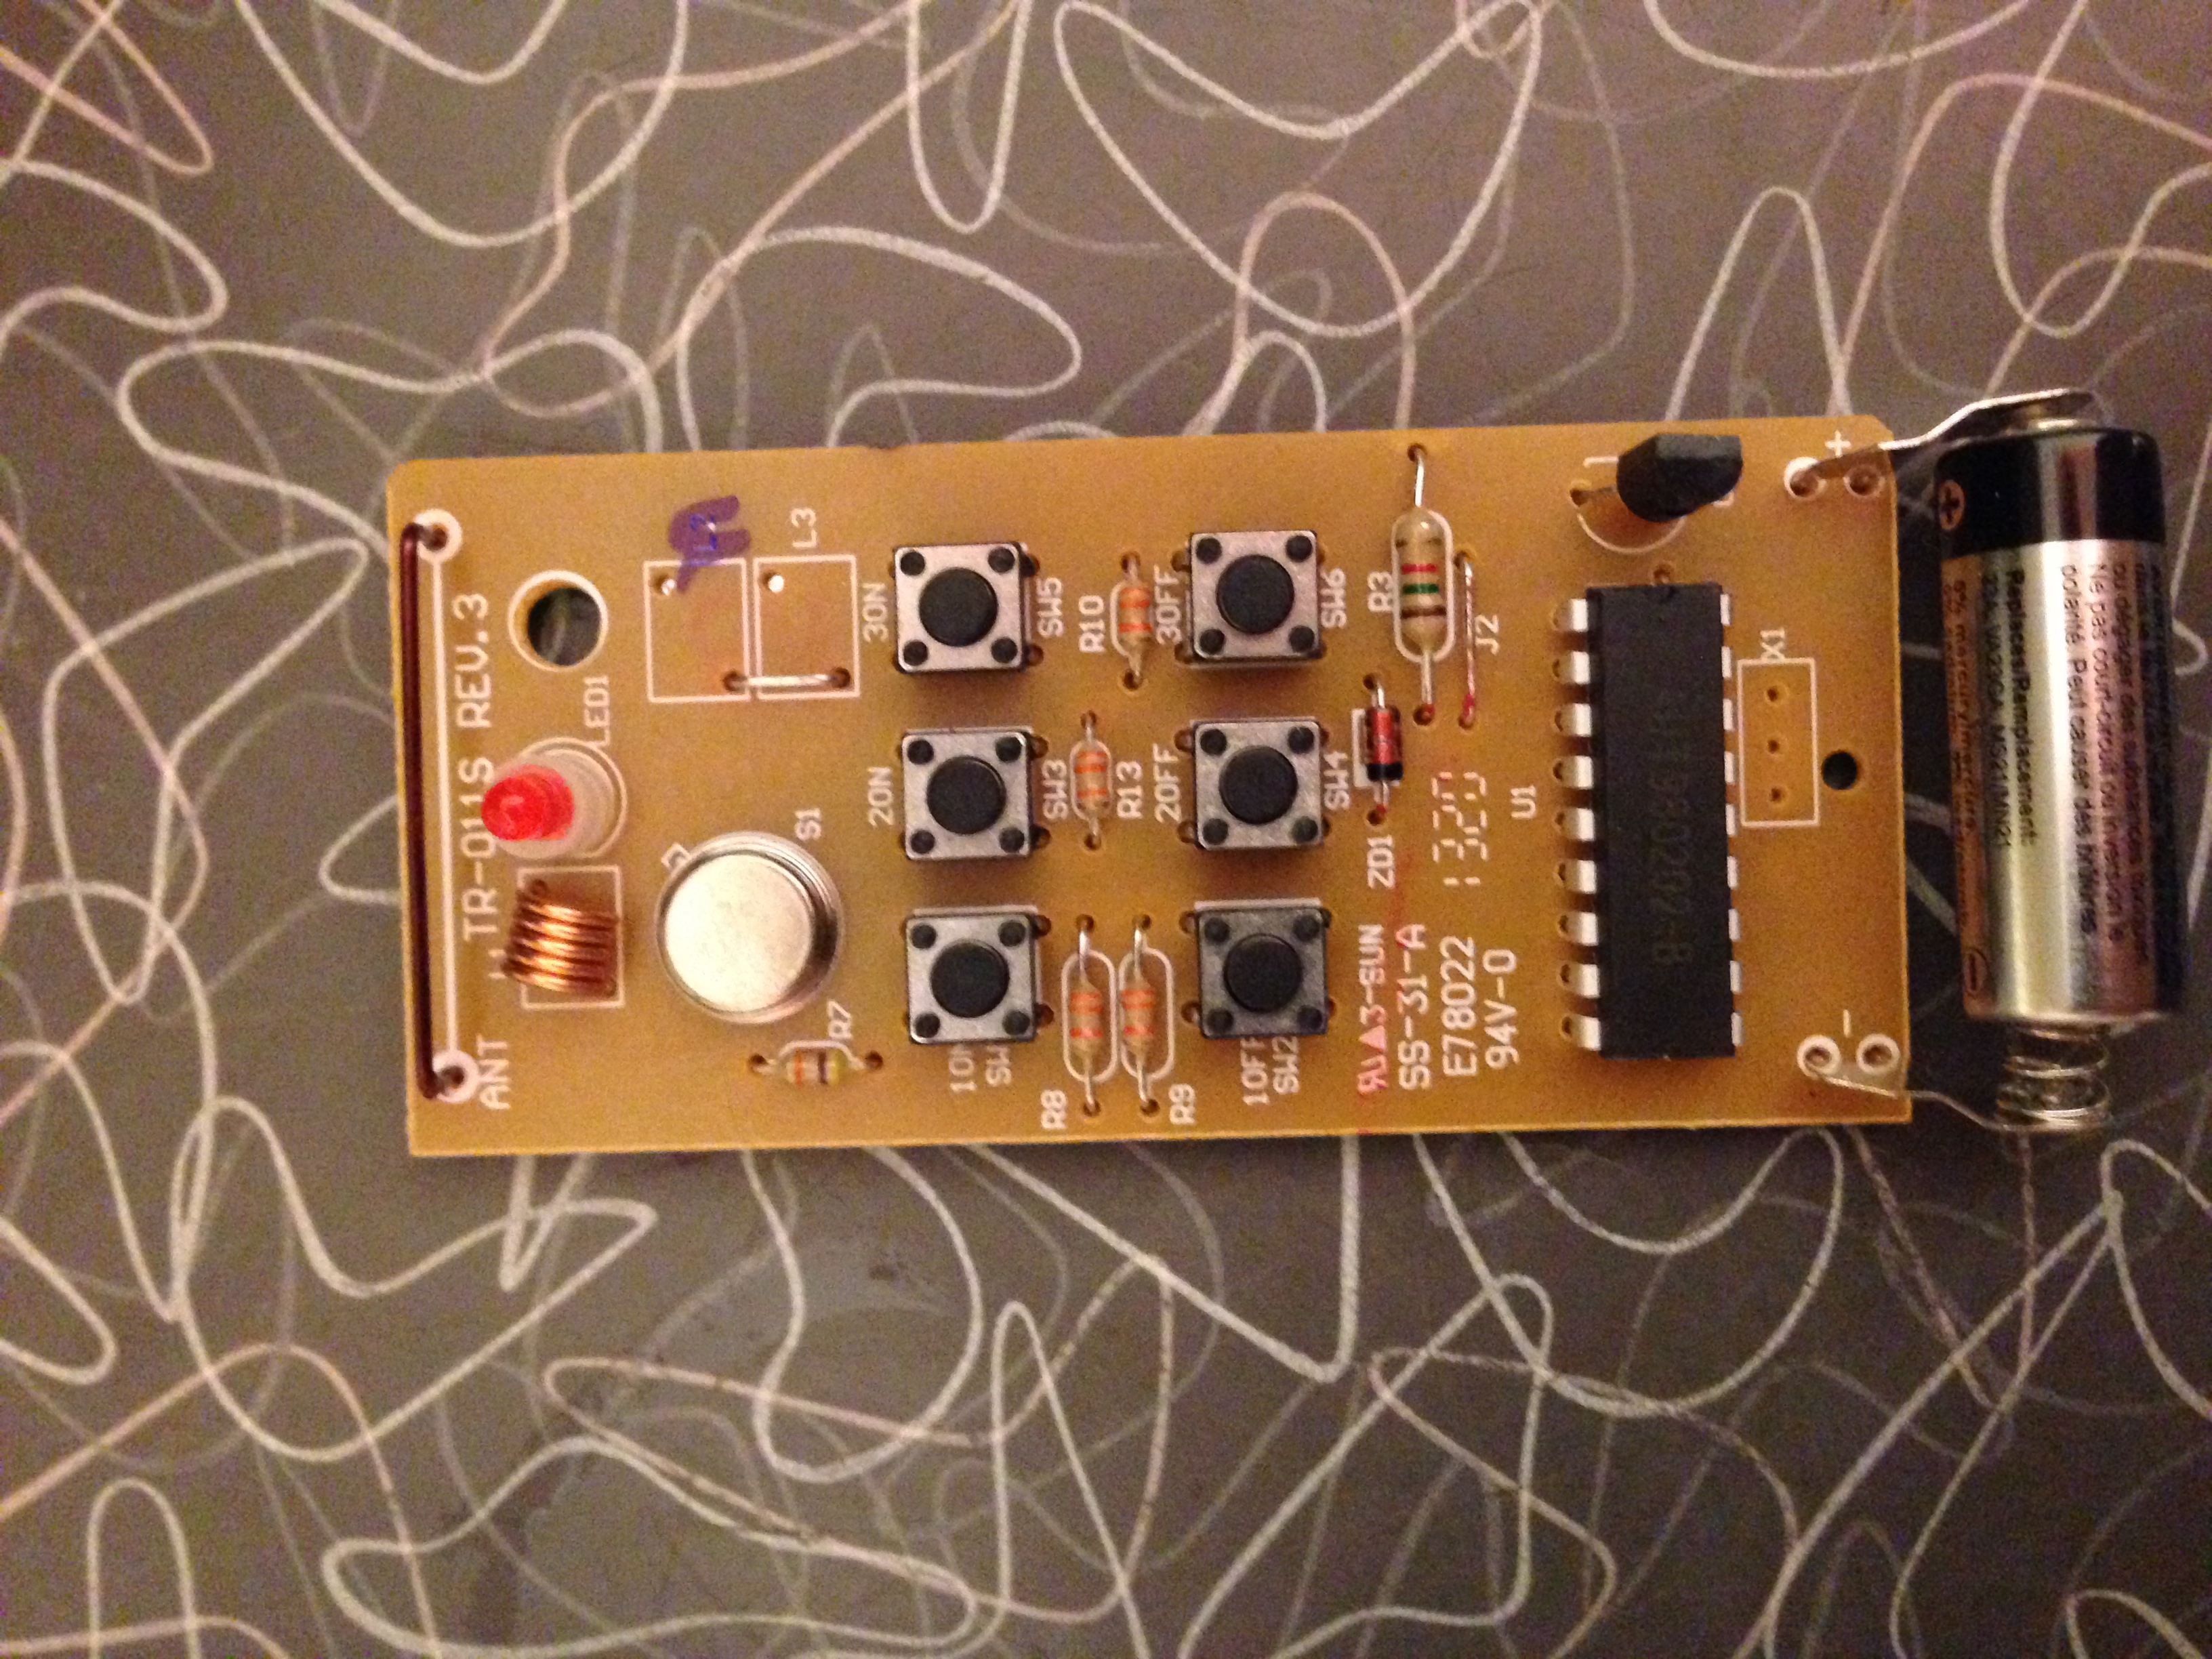 Board taken out of remote controller 2